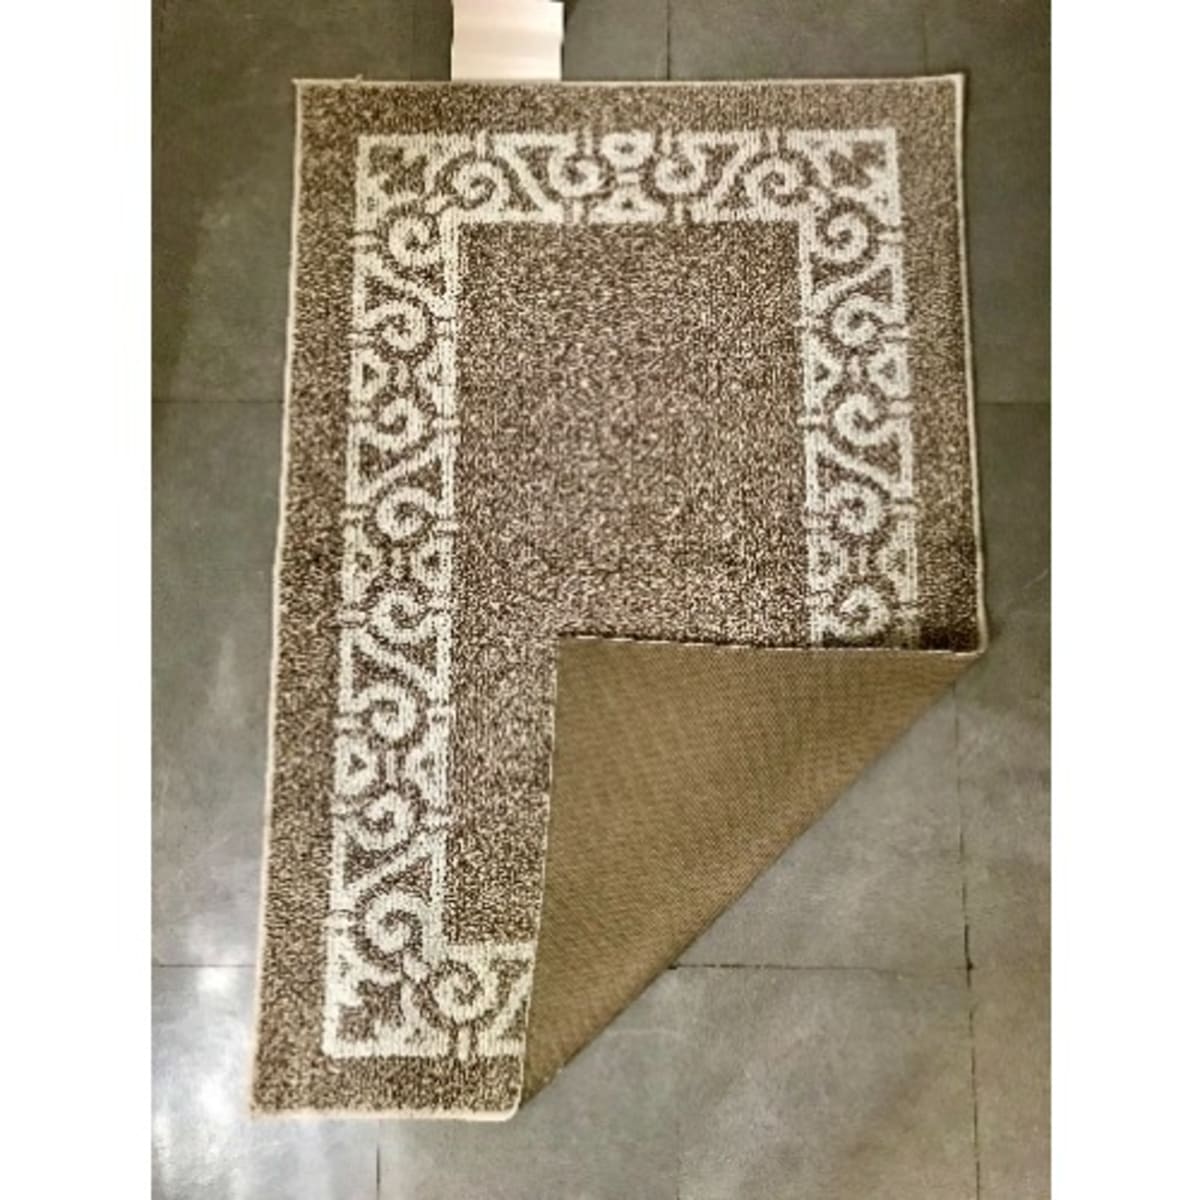 Mohawk Home New Generation Accent Rug Non-Slip Backing 30 in X 45 in